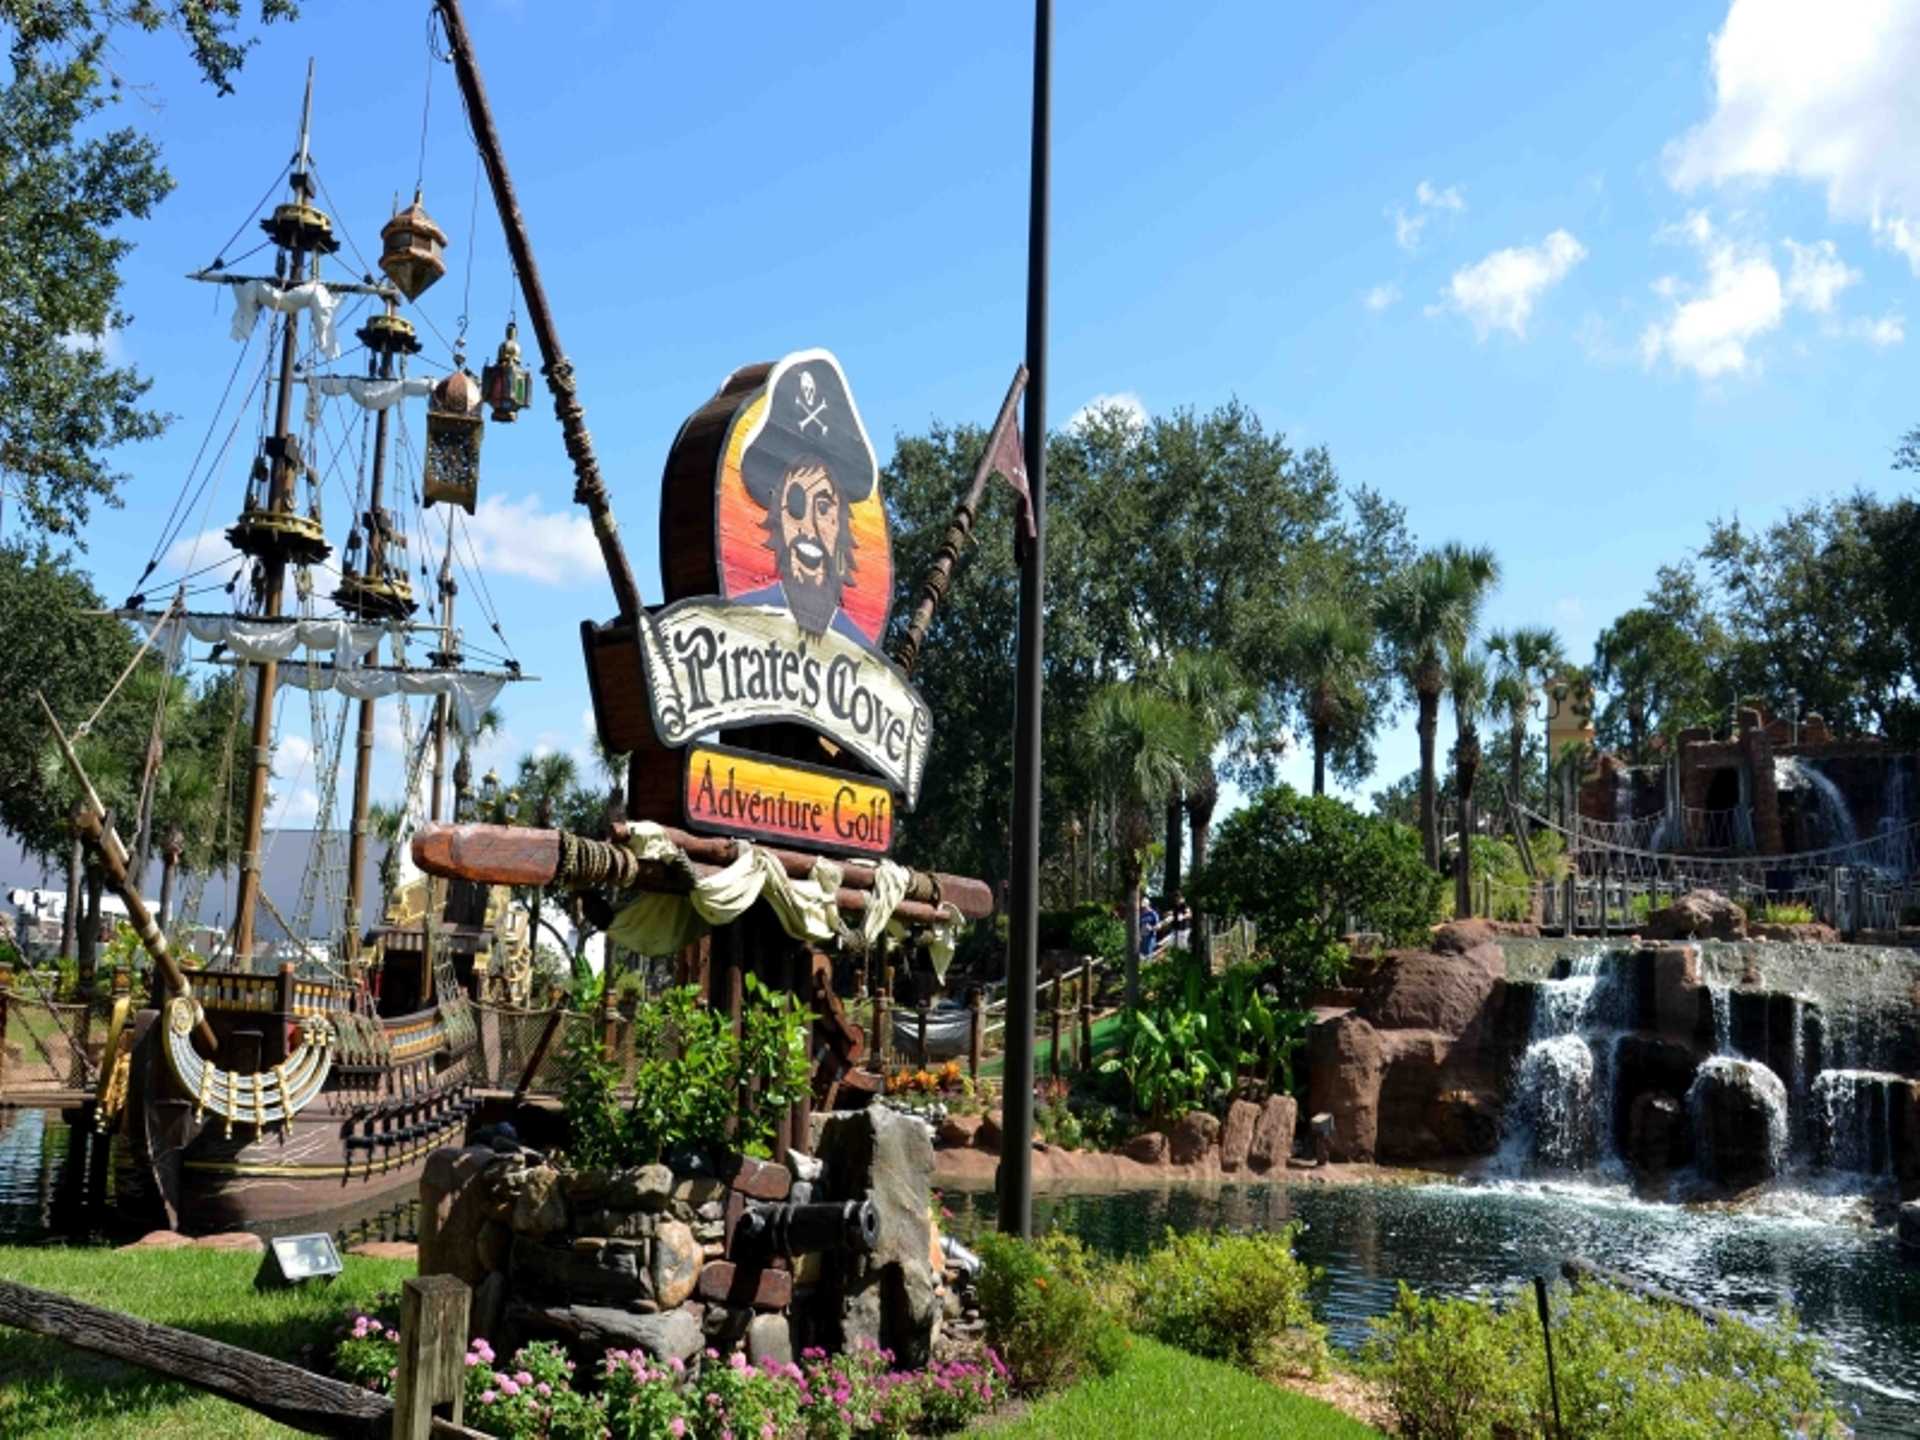 Pirate's Cove Adventure Golf Tickets Only